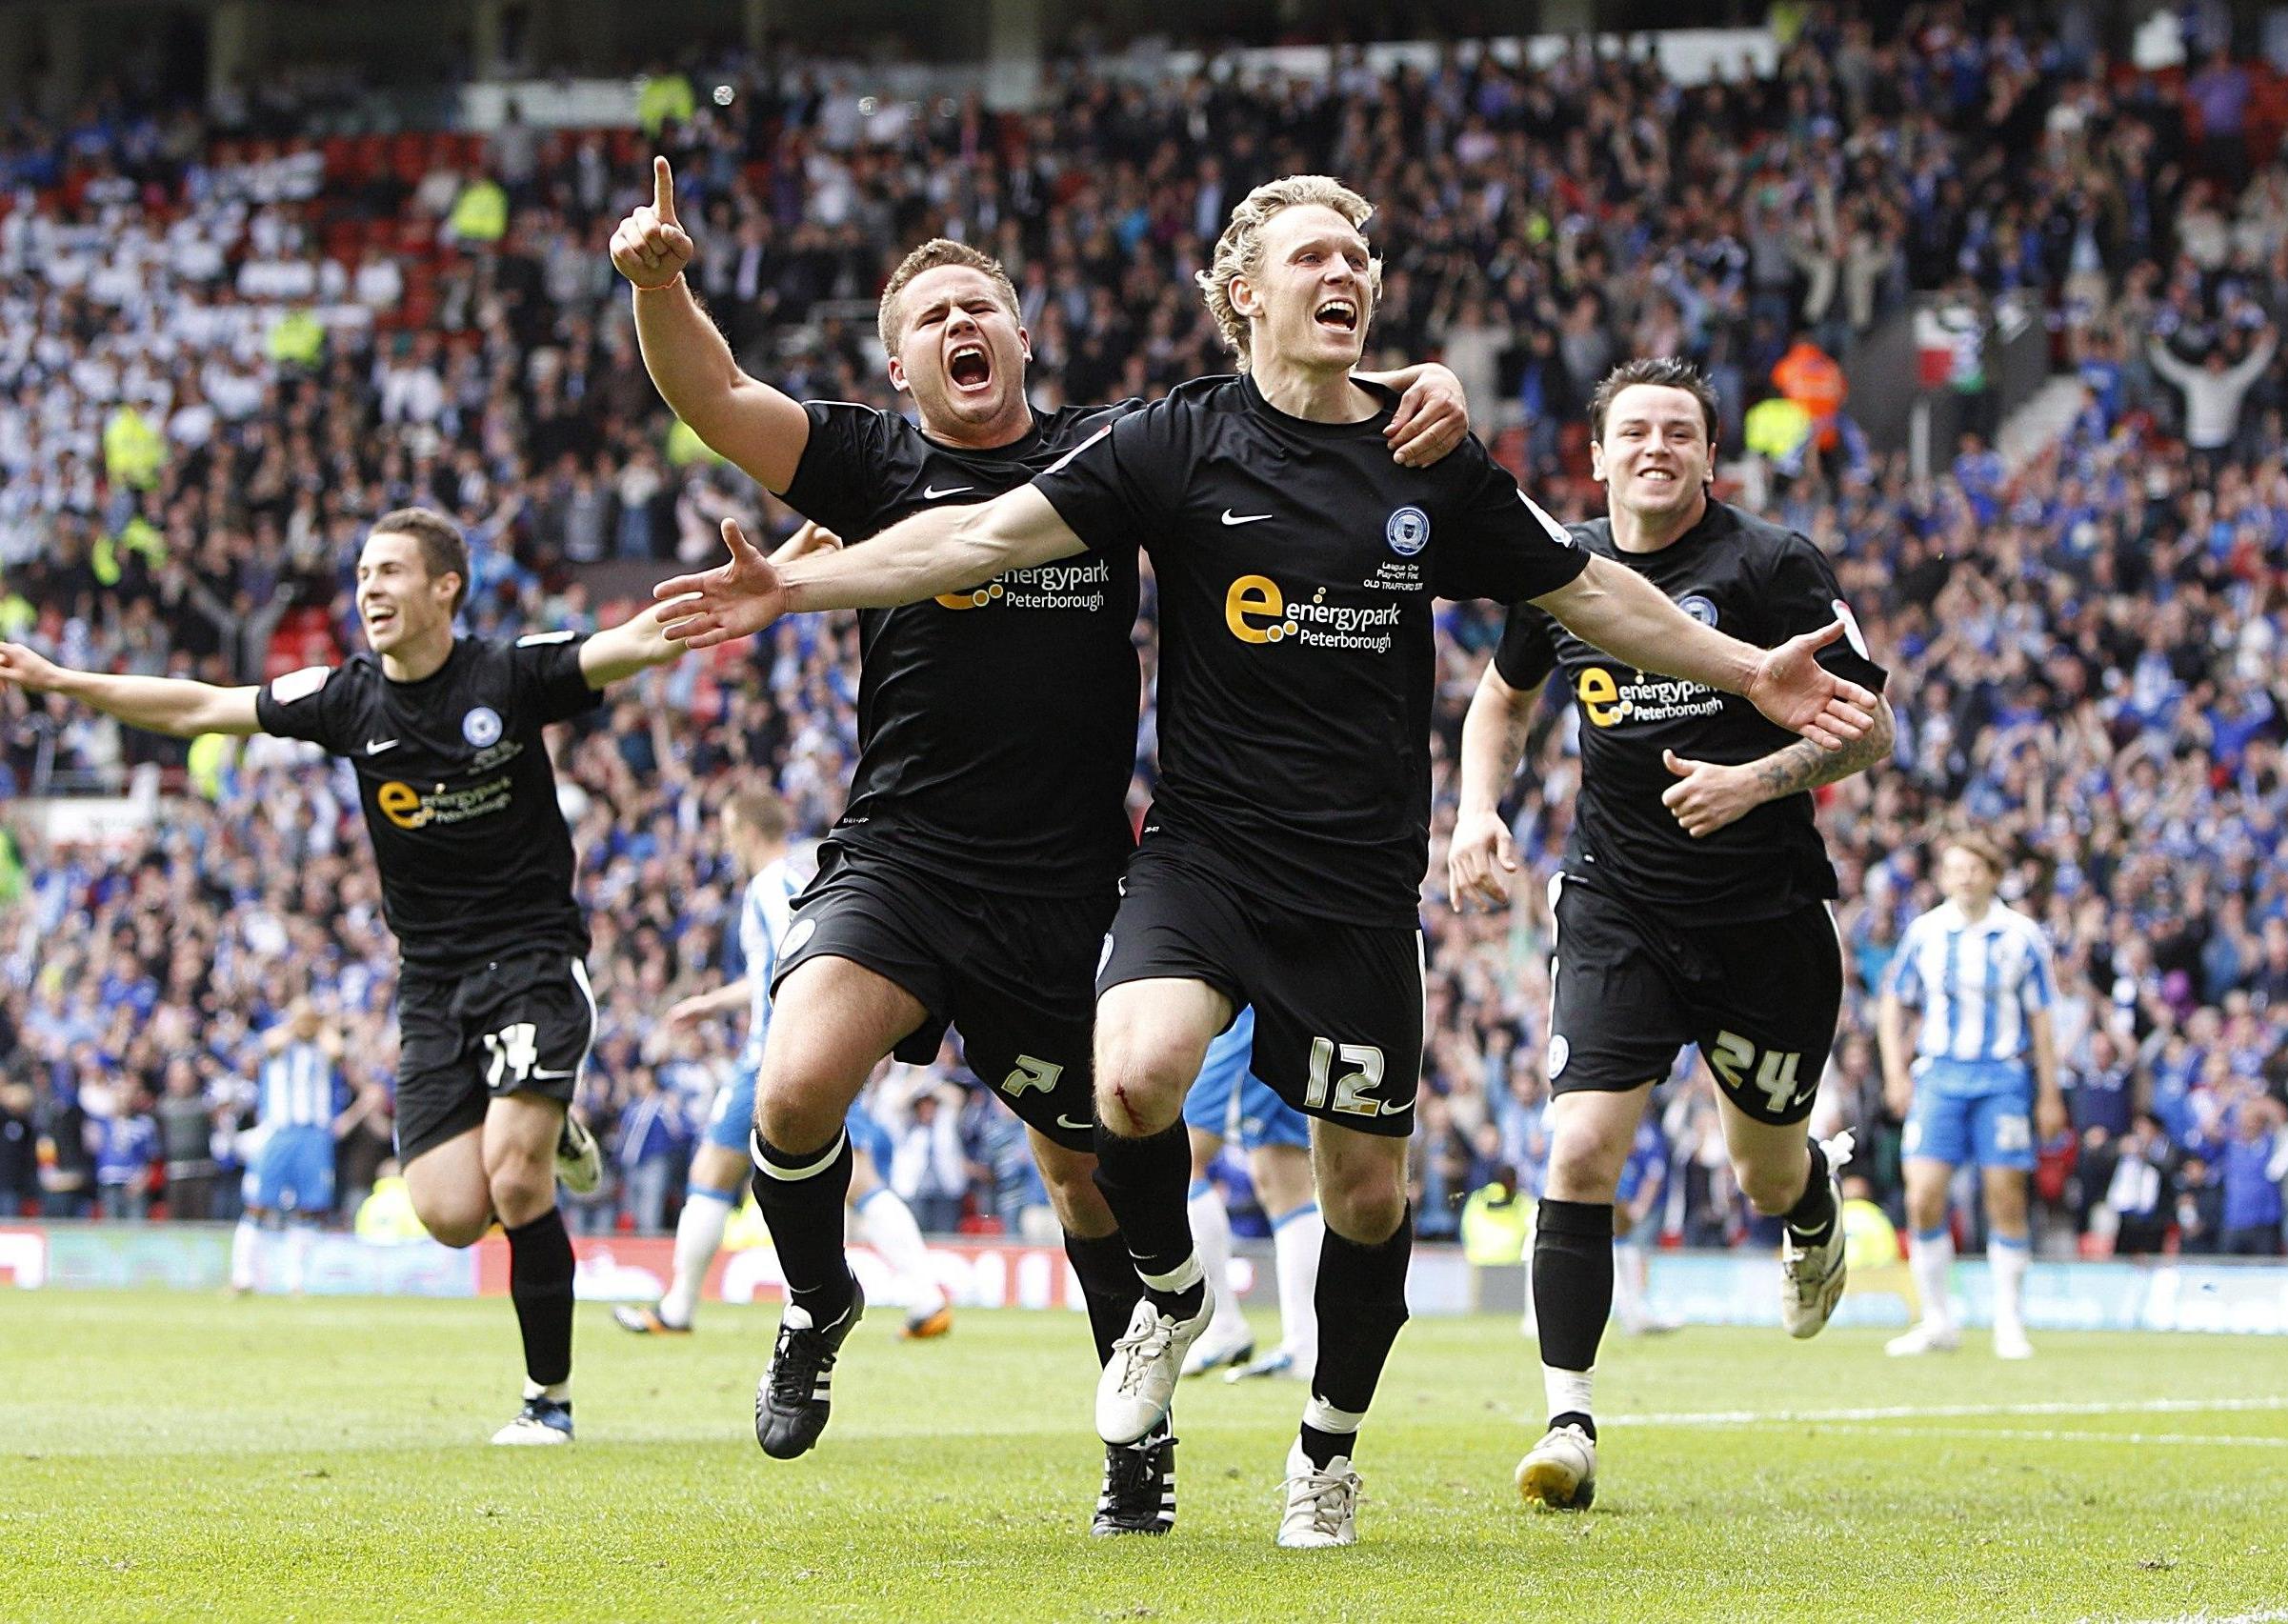 Posh played 542 matches in the decade winning 219, drawing 110 losing 113, scoring 863 goals and conceding 789. None were as memorable as the 2011 League One play-off final win over Huddersfield (pictured)